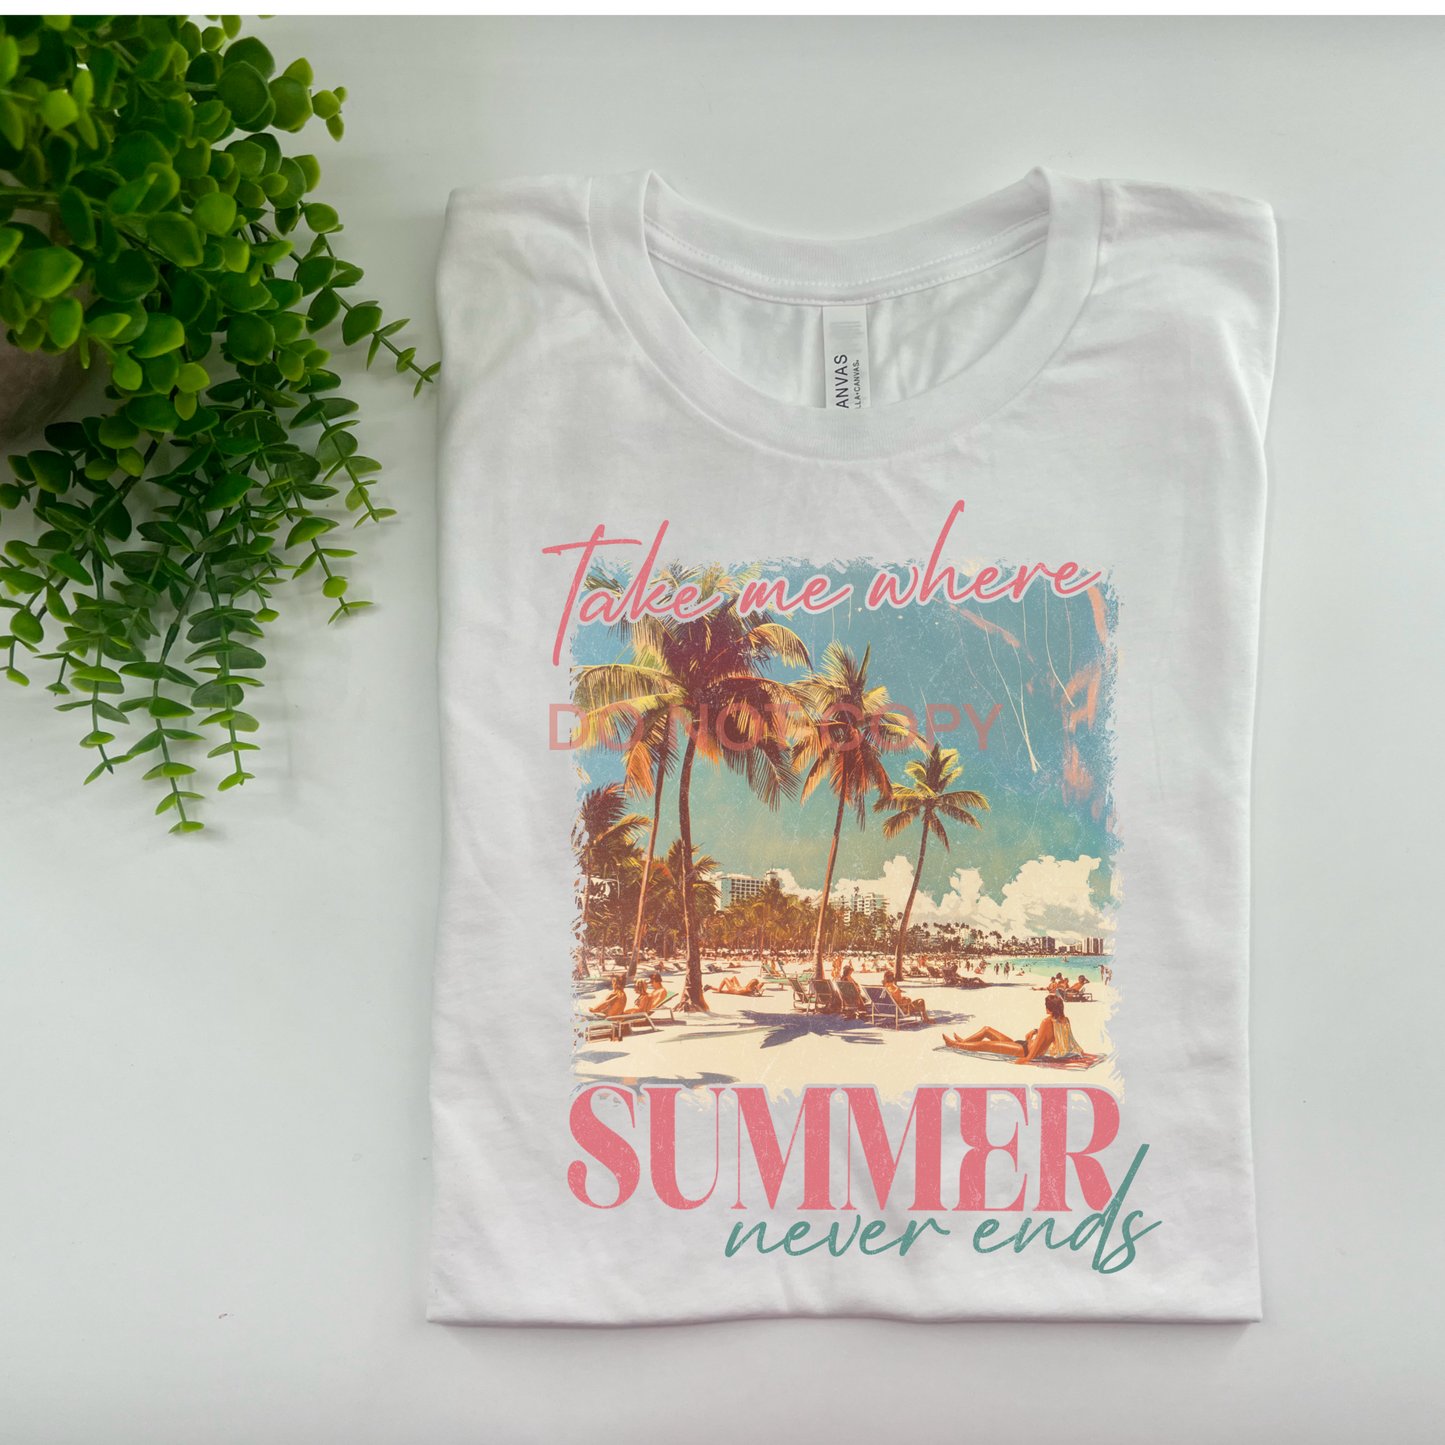 Take me where summer never ends  - Bella Canvas - White